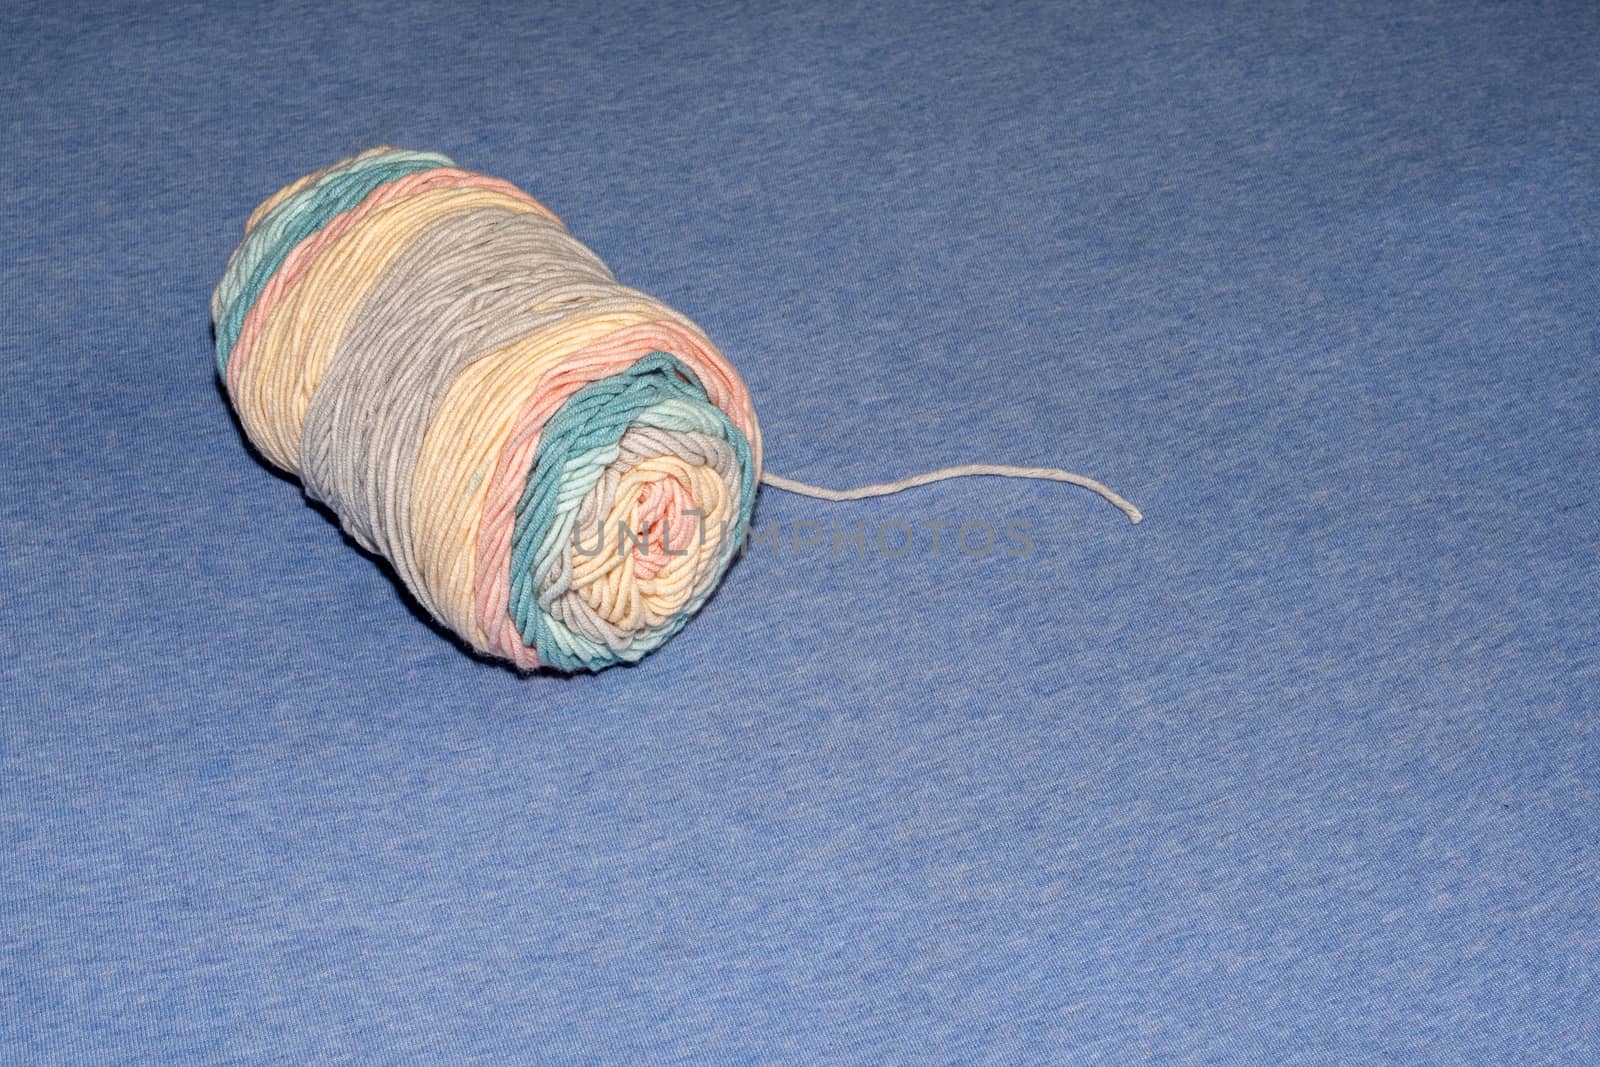 Skein of Yarn with Pastel Colors by colintemple